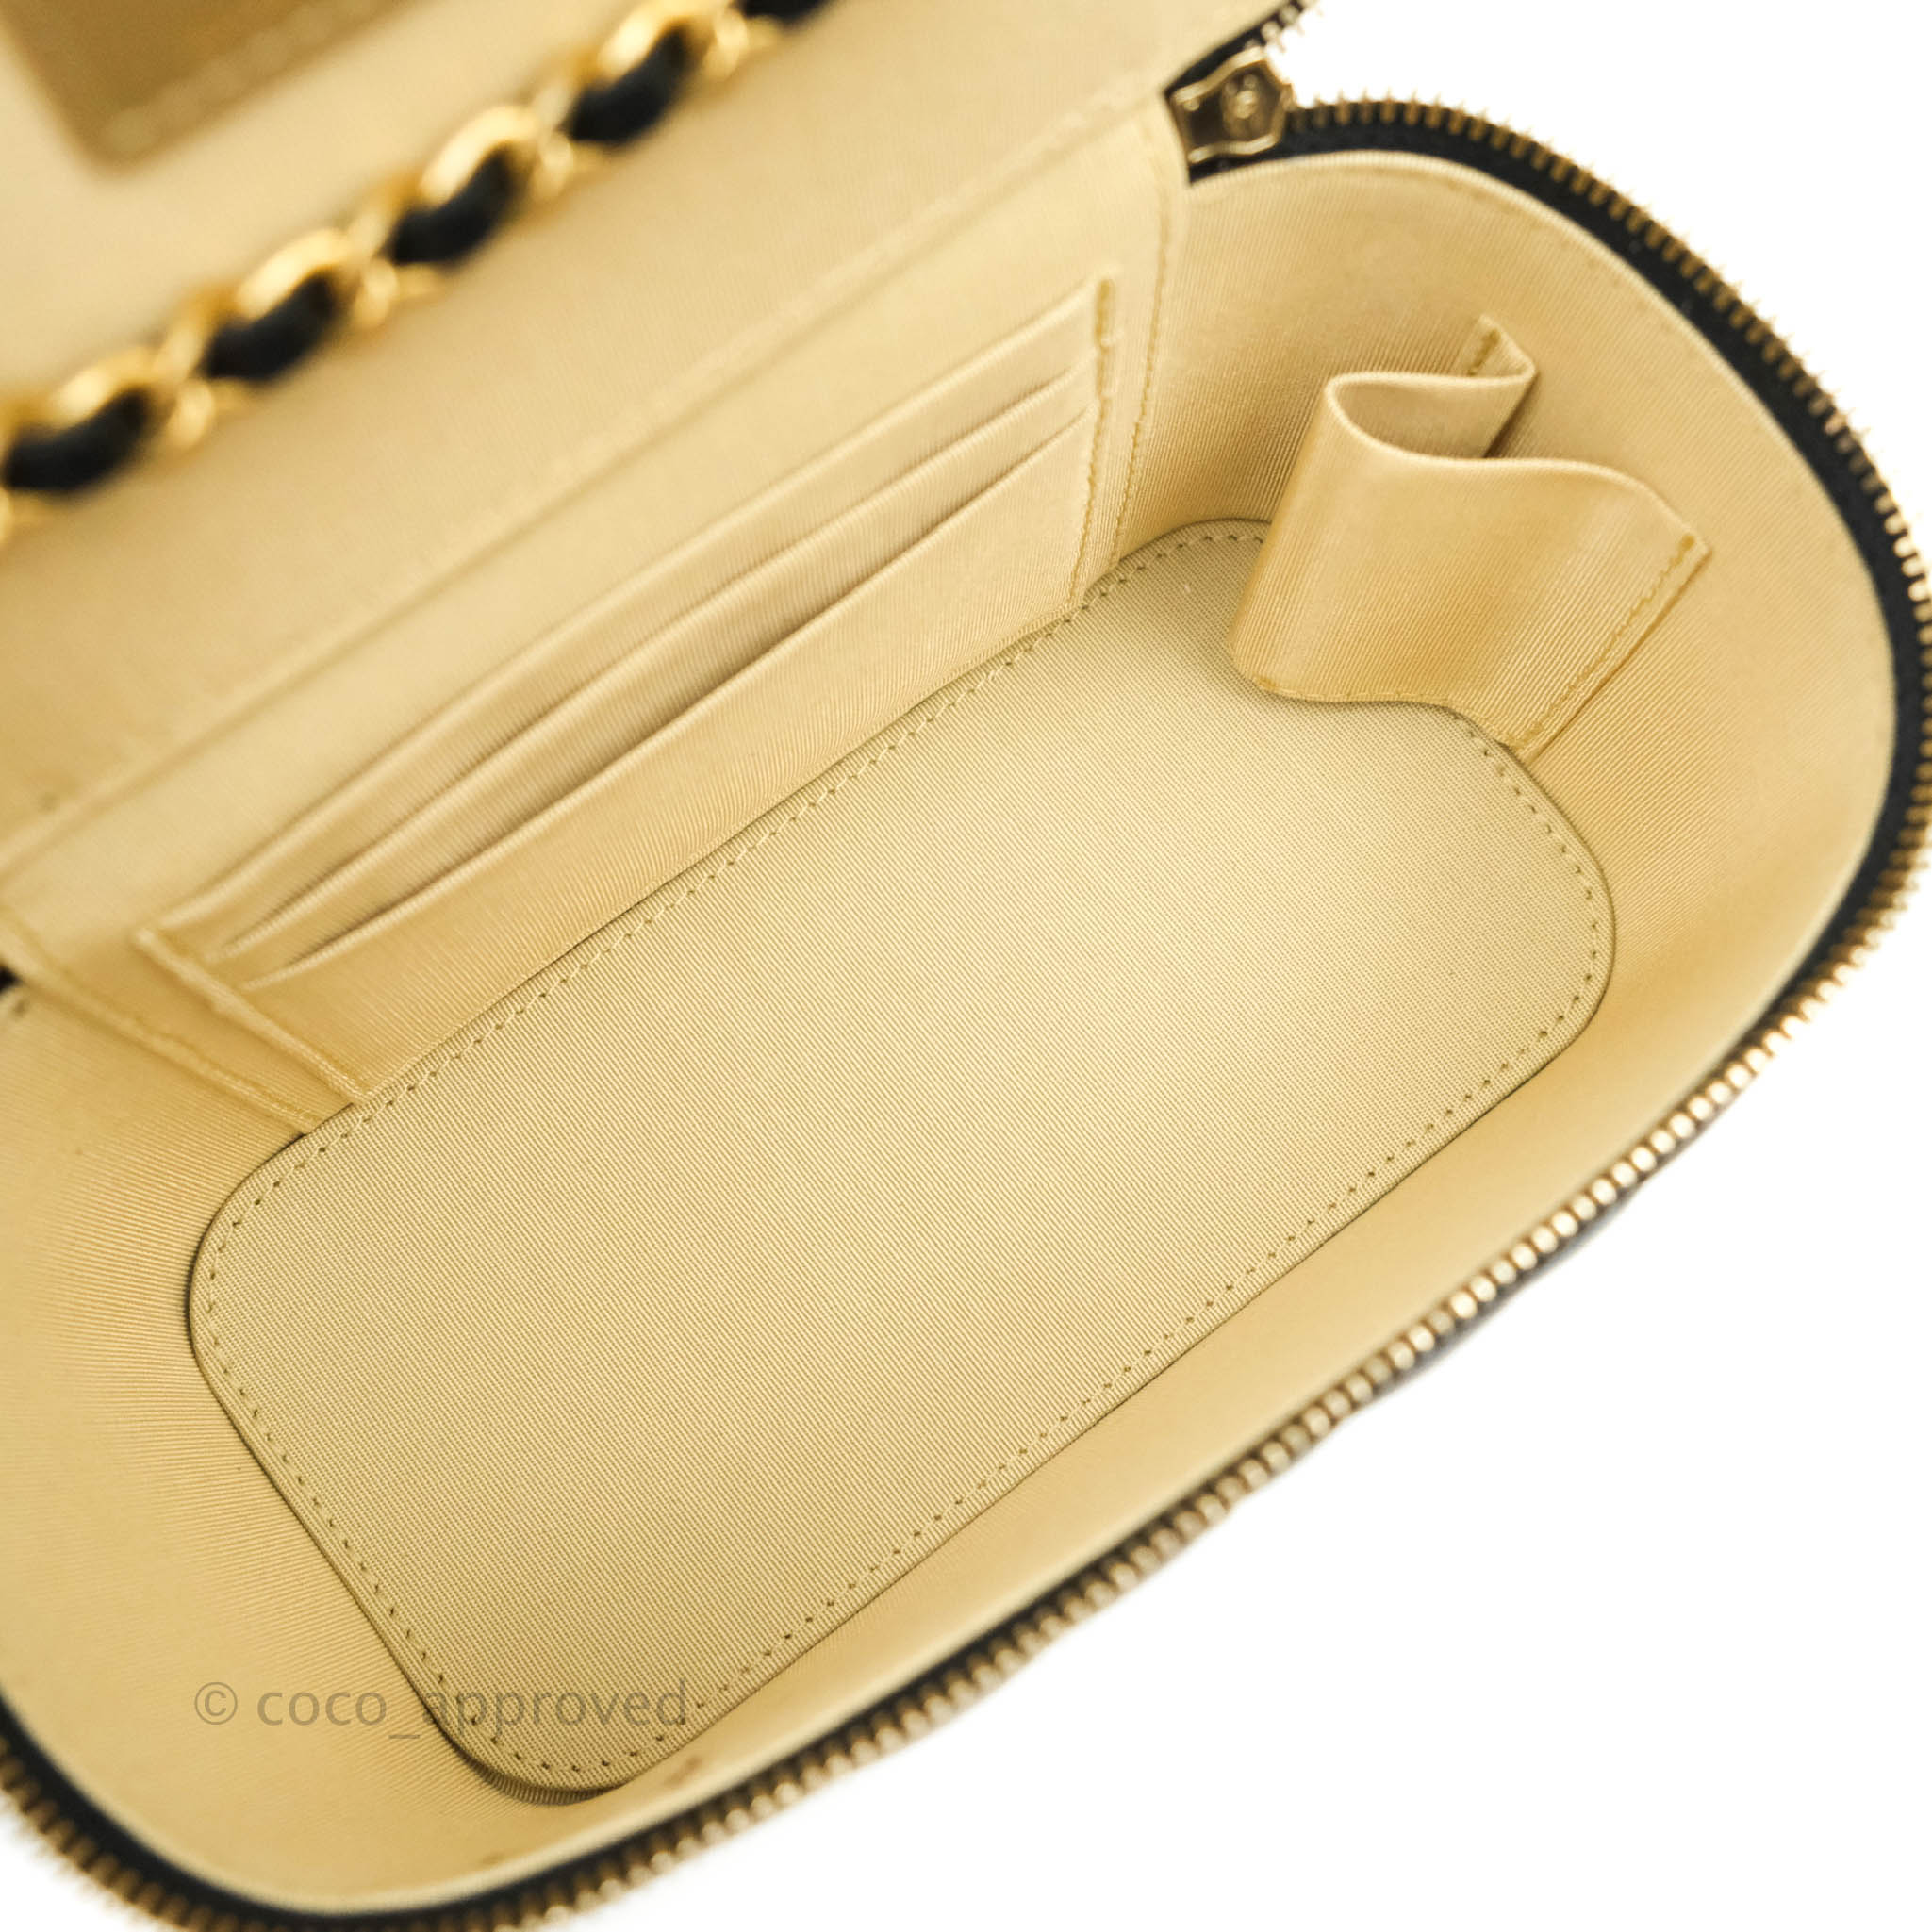 Chanel 2022 Coco Pearl Crush Vanity Case - ShopStyle Shoulder Bags